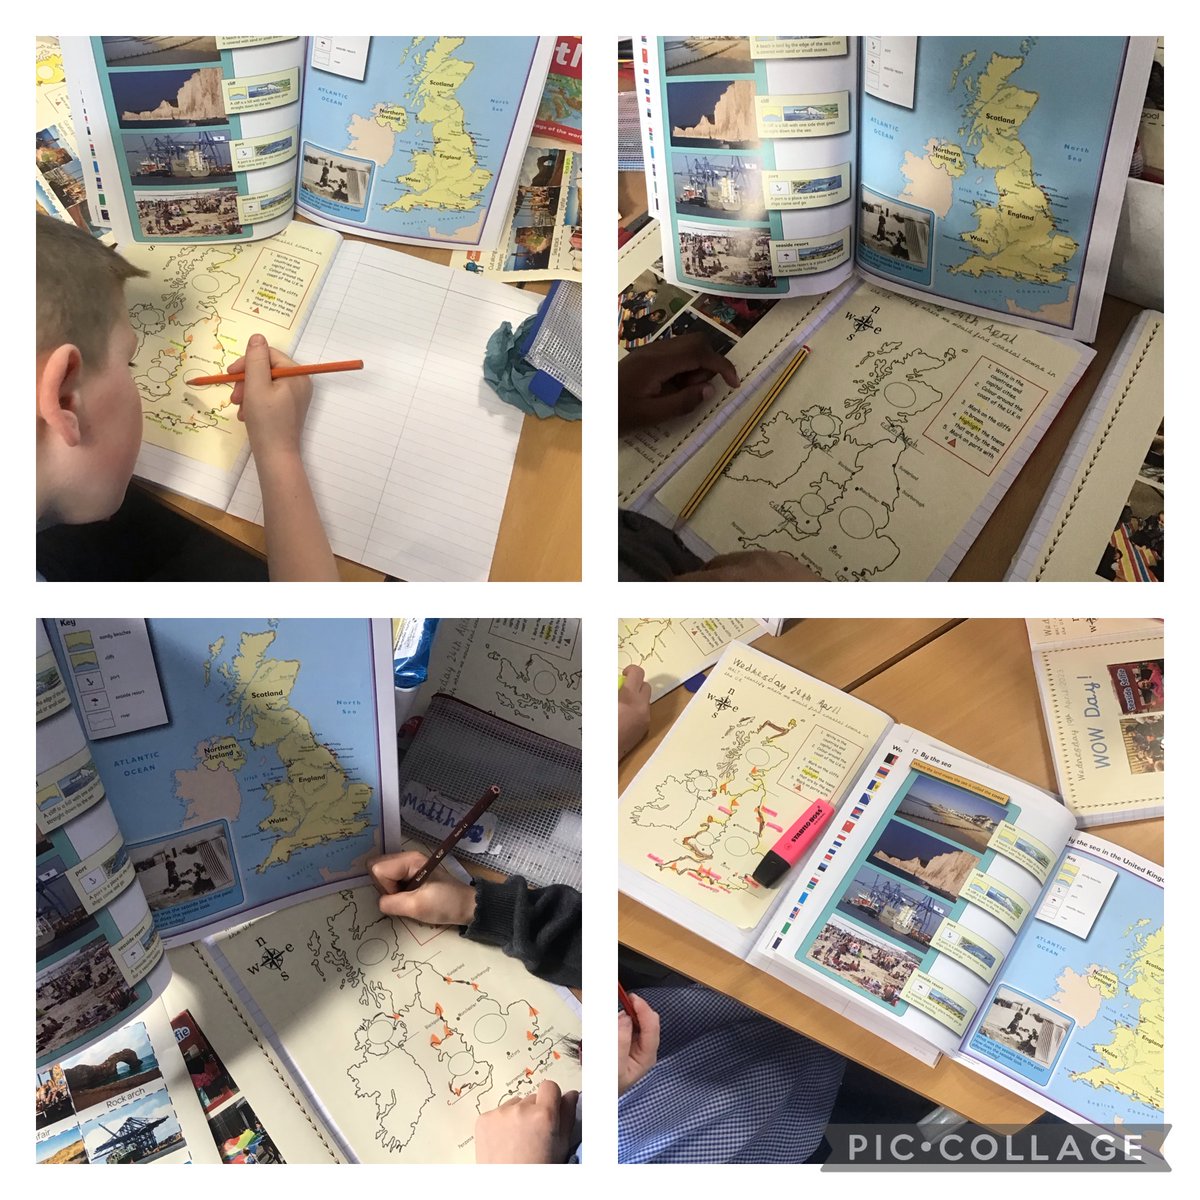 2DG worked hard today in Geography locating the coasts of the UK. We used atlases to identify and locate human and physical features including ports, cliffs and coastal towns and cities. 🏖️🗺️